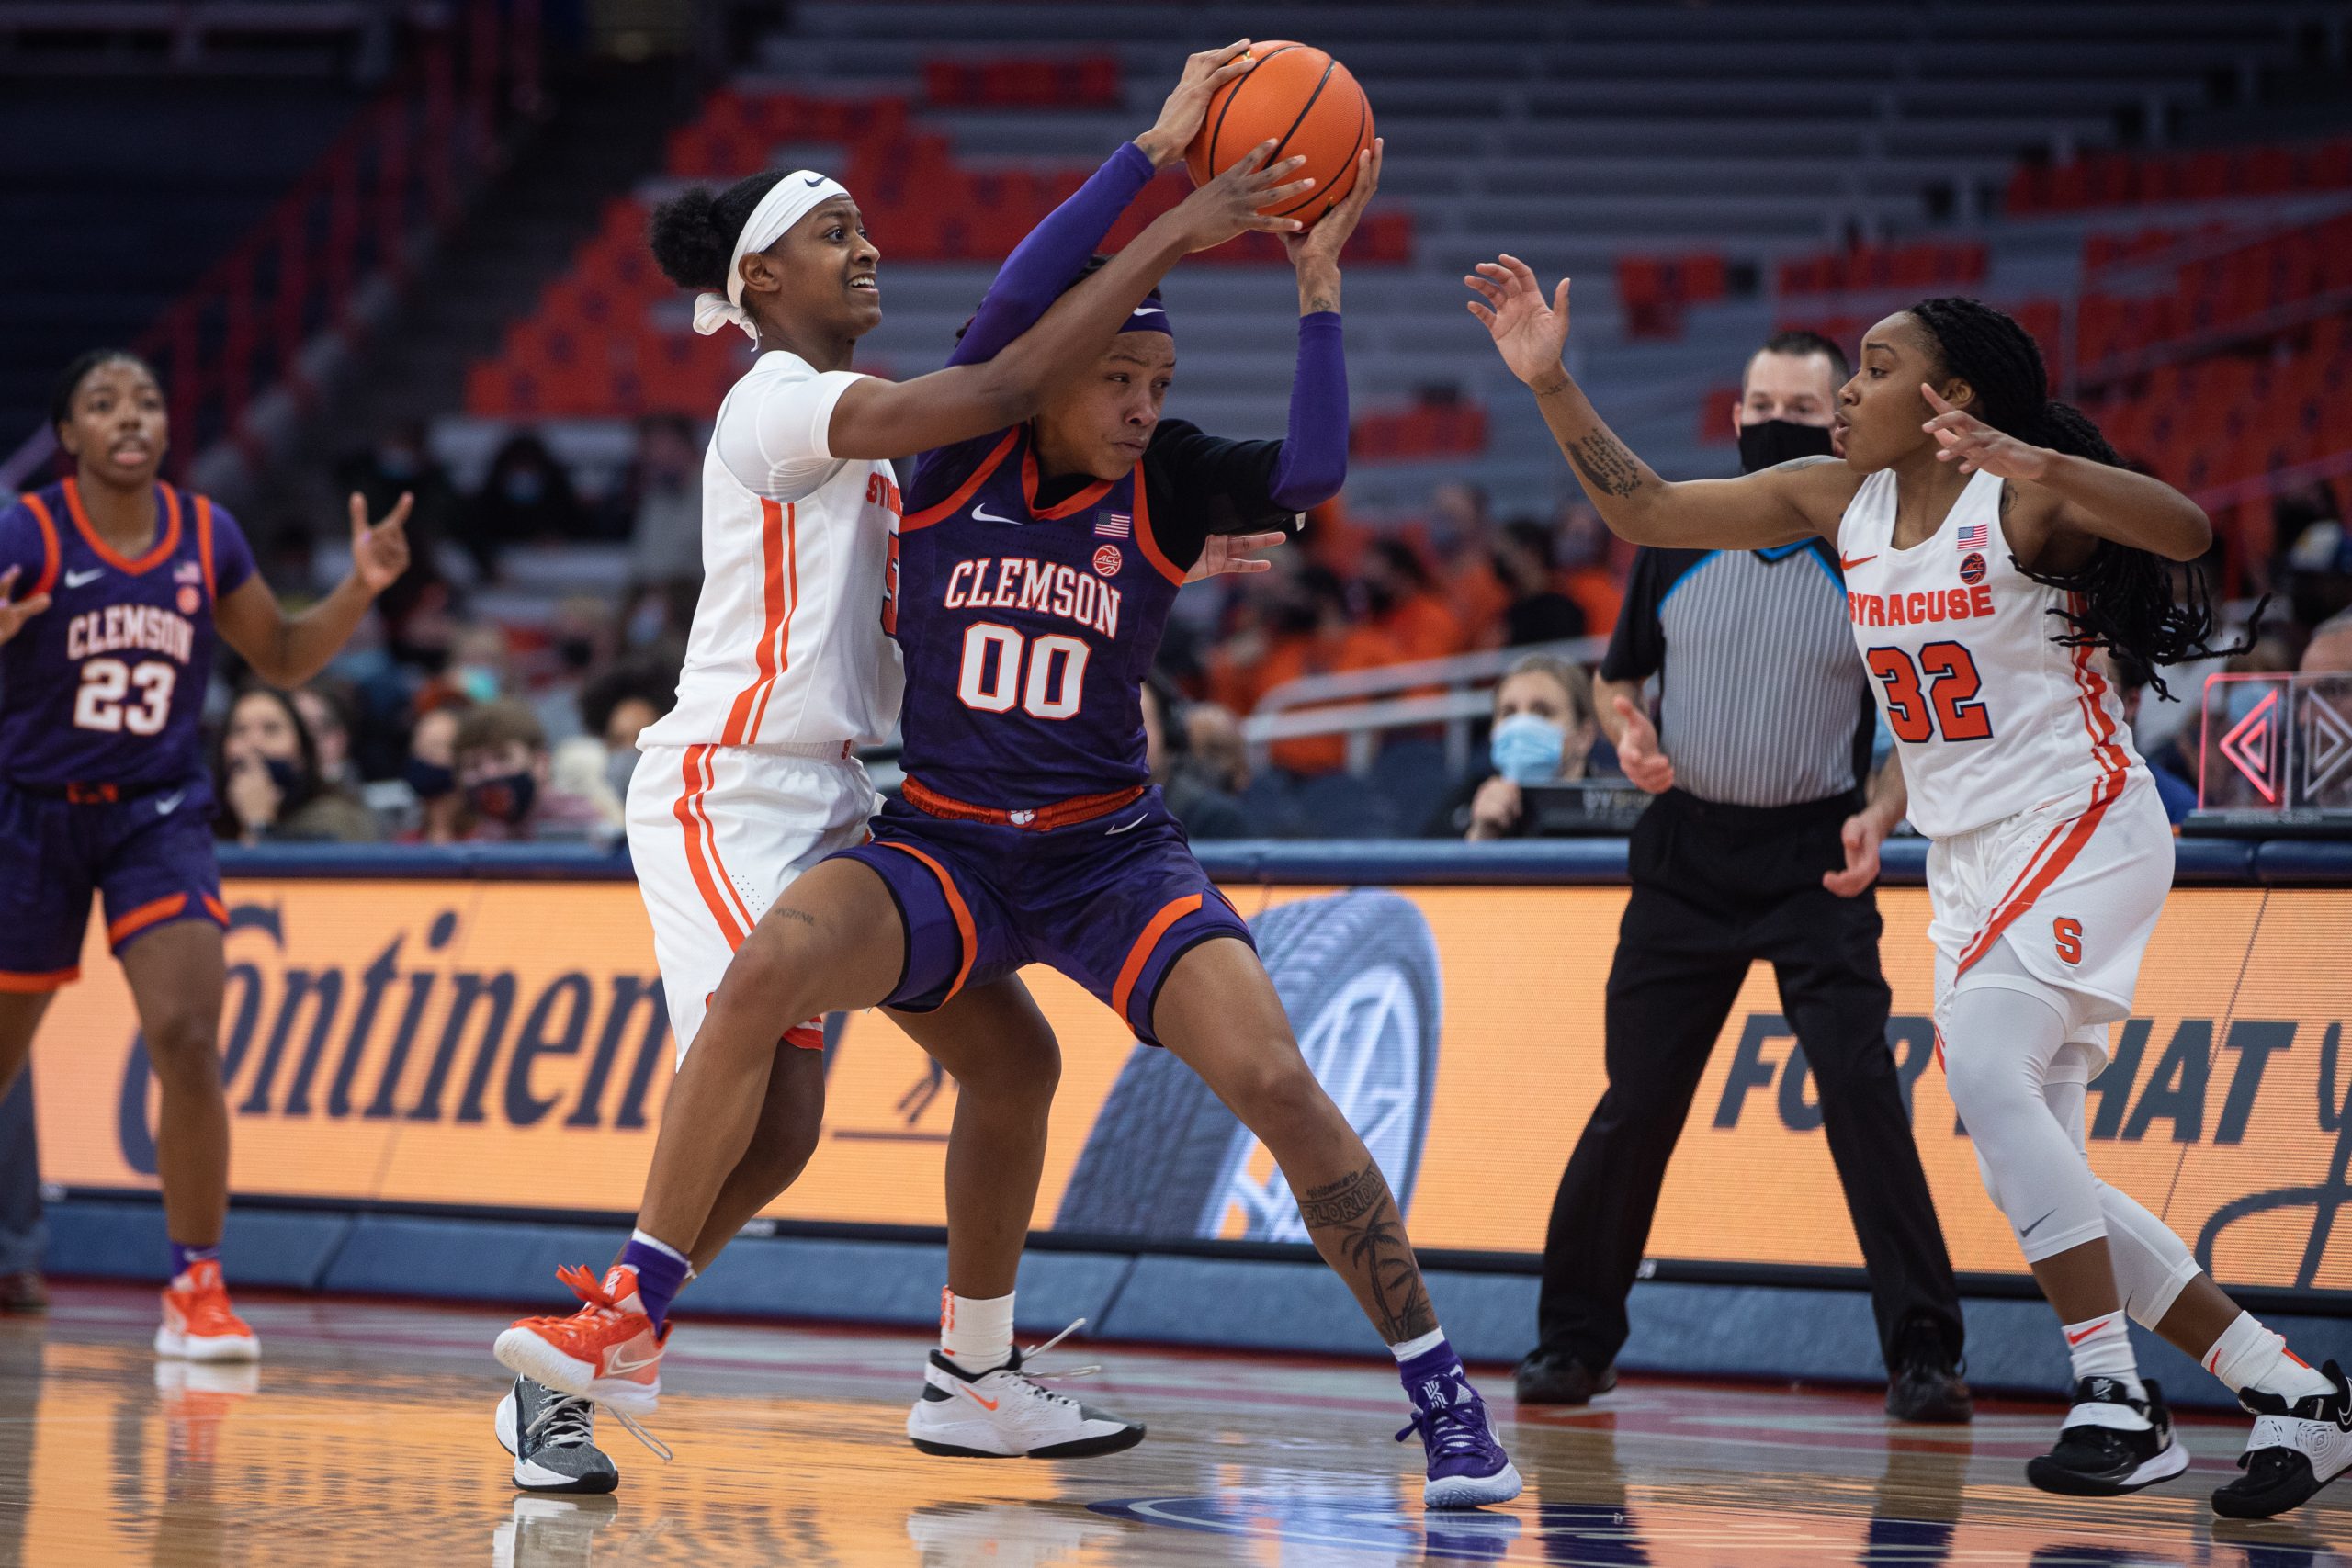 Syracuse's Teisha Hyman (5) and Chrislyn Carr (32) converge on Clemson's Delicia Washington in the process of a steal during their huge win Saturday night in The Dome.